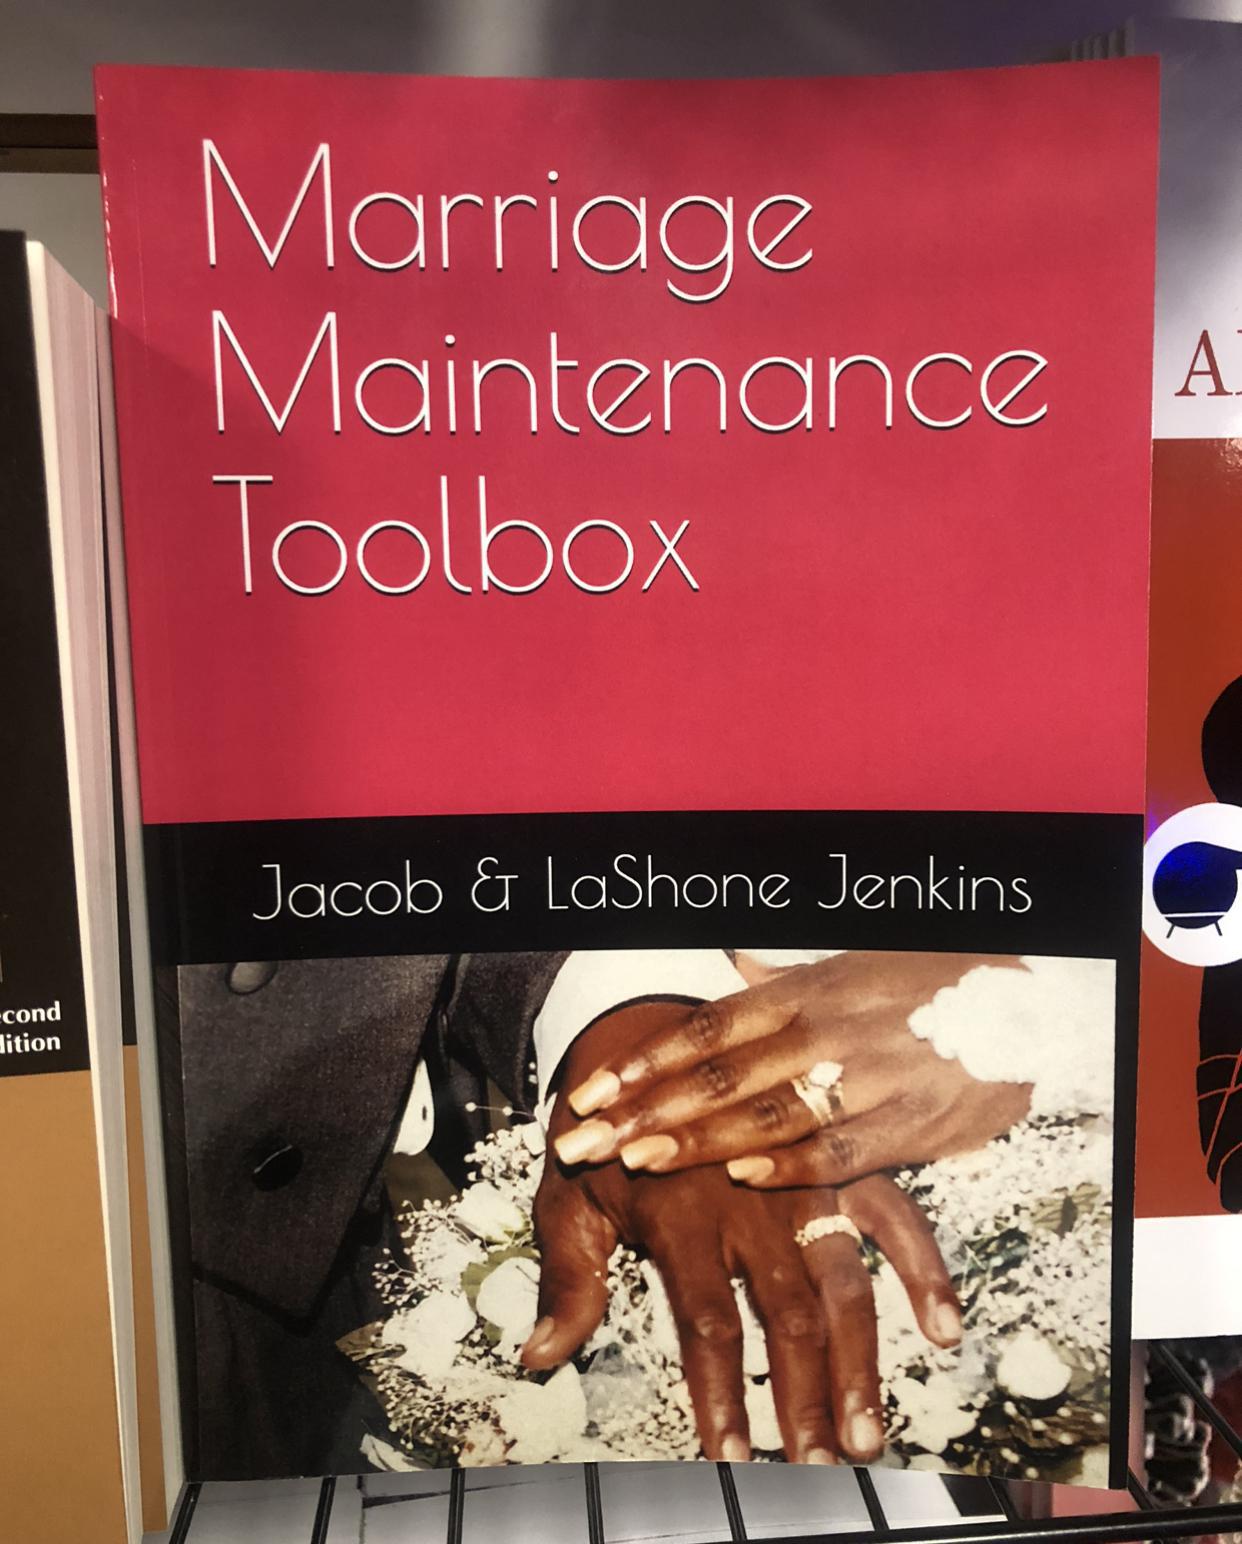 "Marriage Maintenance Toolbox" by Jacob and LaShone Jenkins